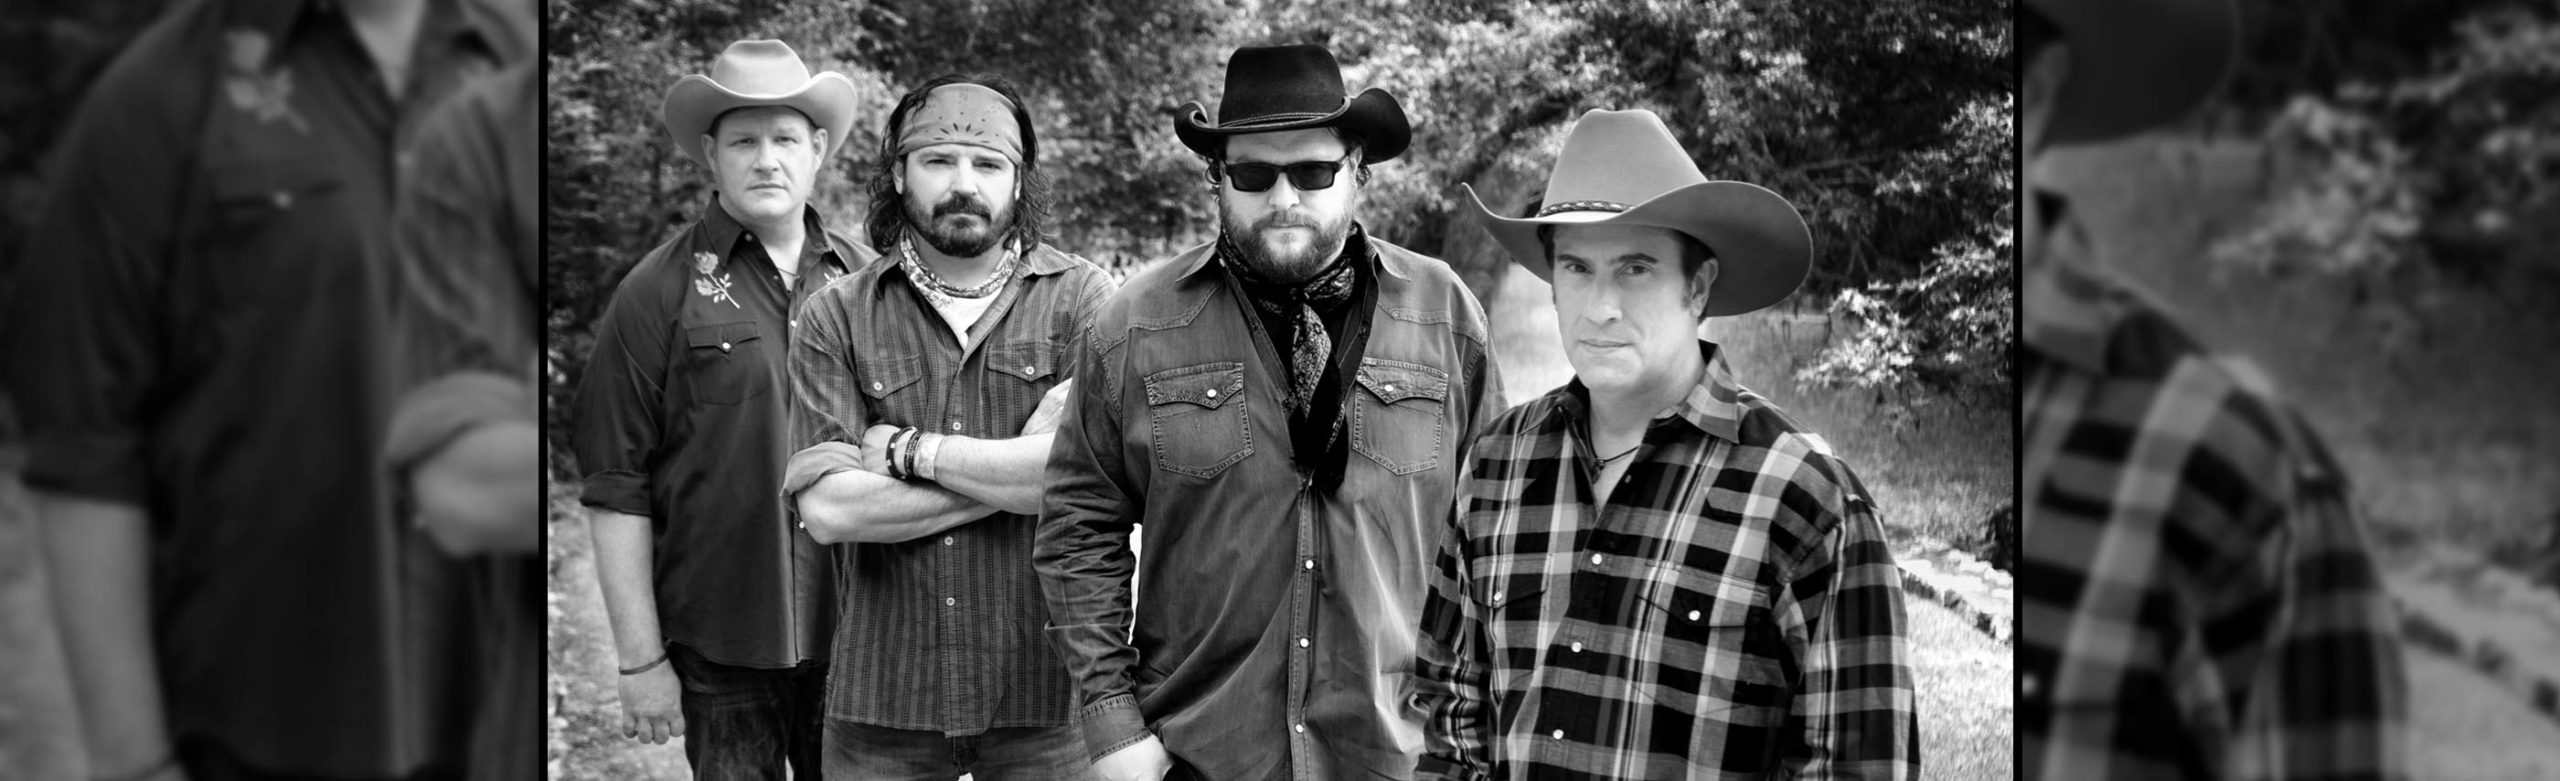 Reckless Kelly Tickets + Autographed Vinyl Giveaway 2022 Image